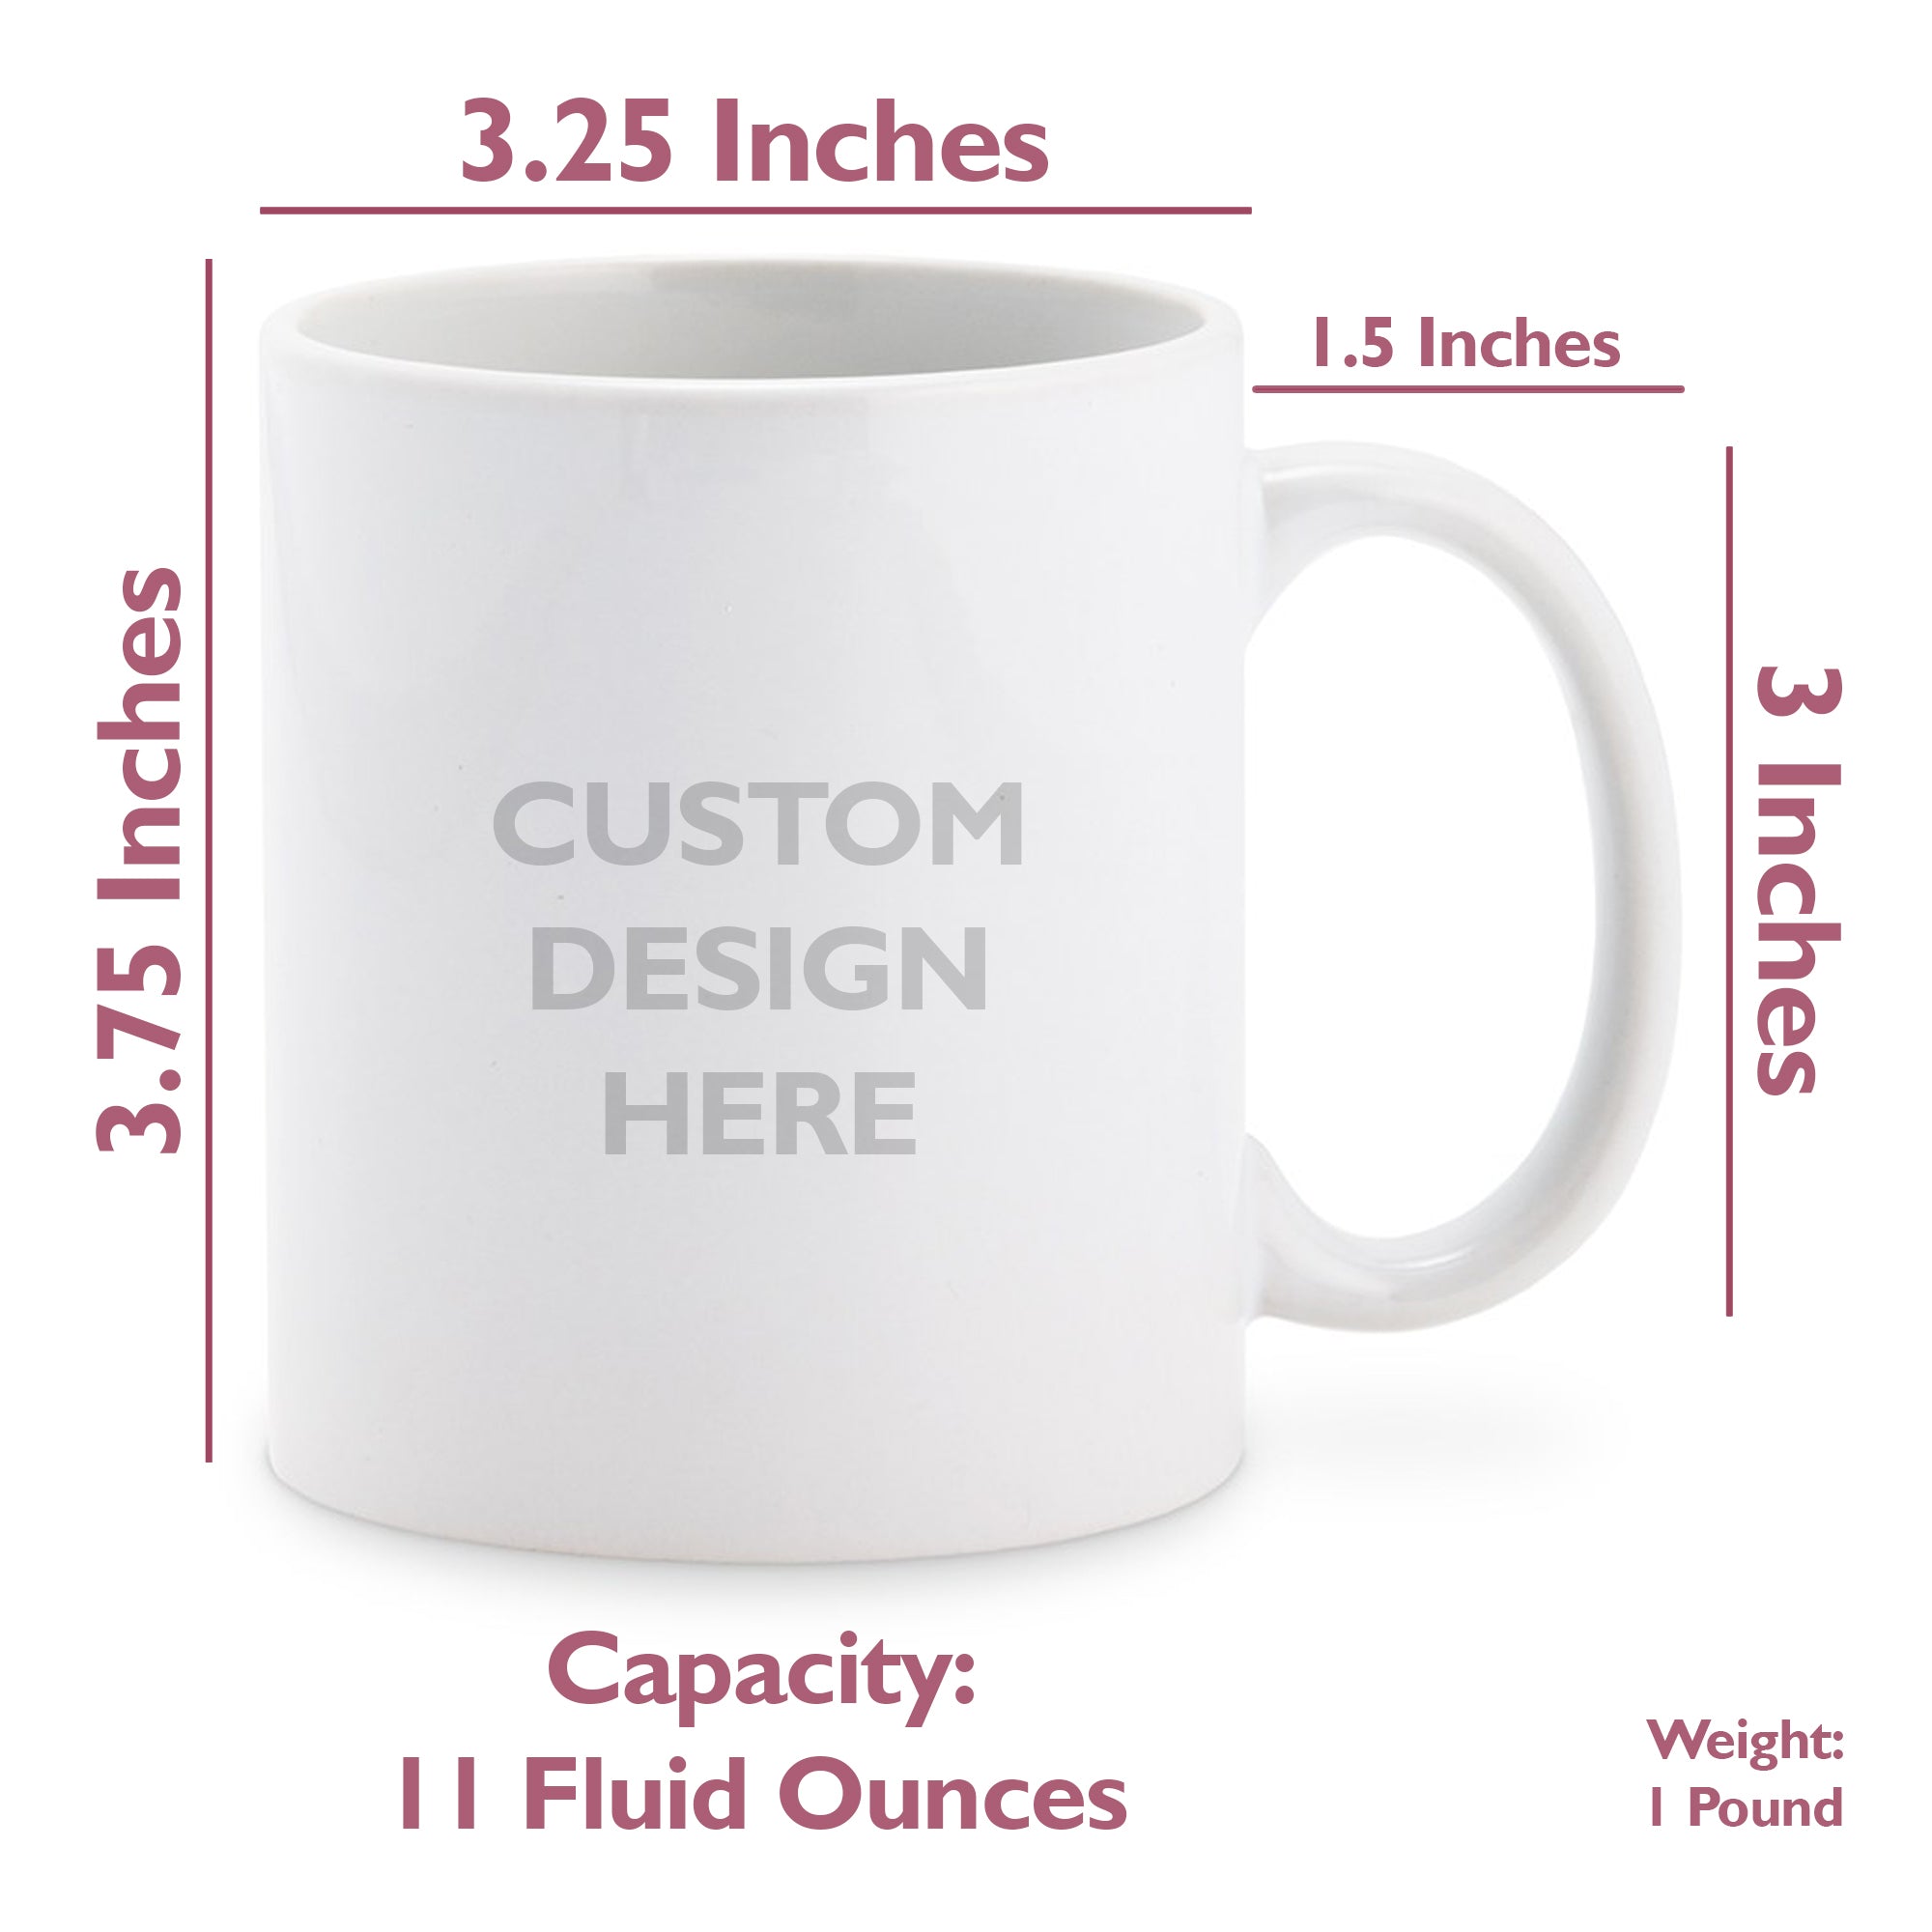 Parents Collection (Happy Father's Day From Your Strongest Swimmer) 11 oz White Ceramic Mug